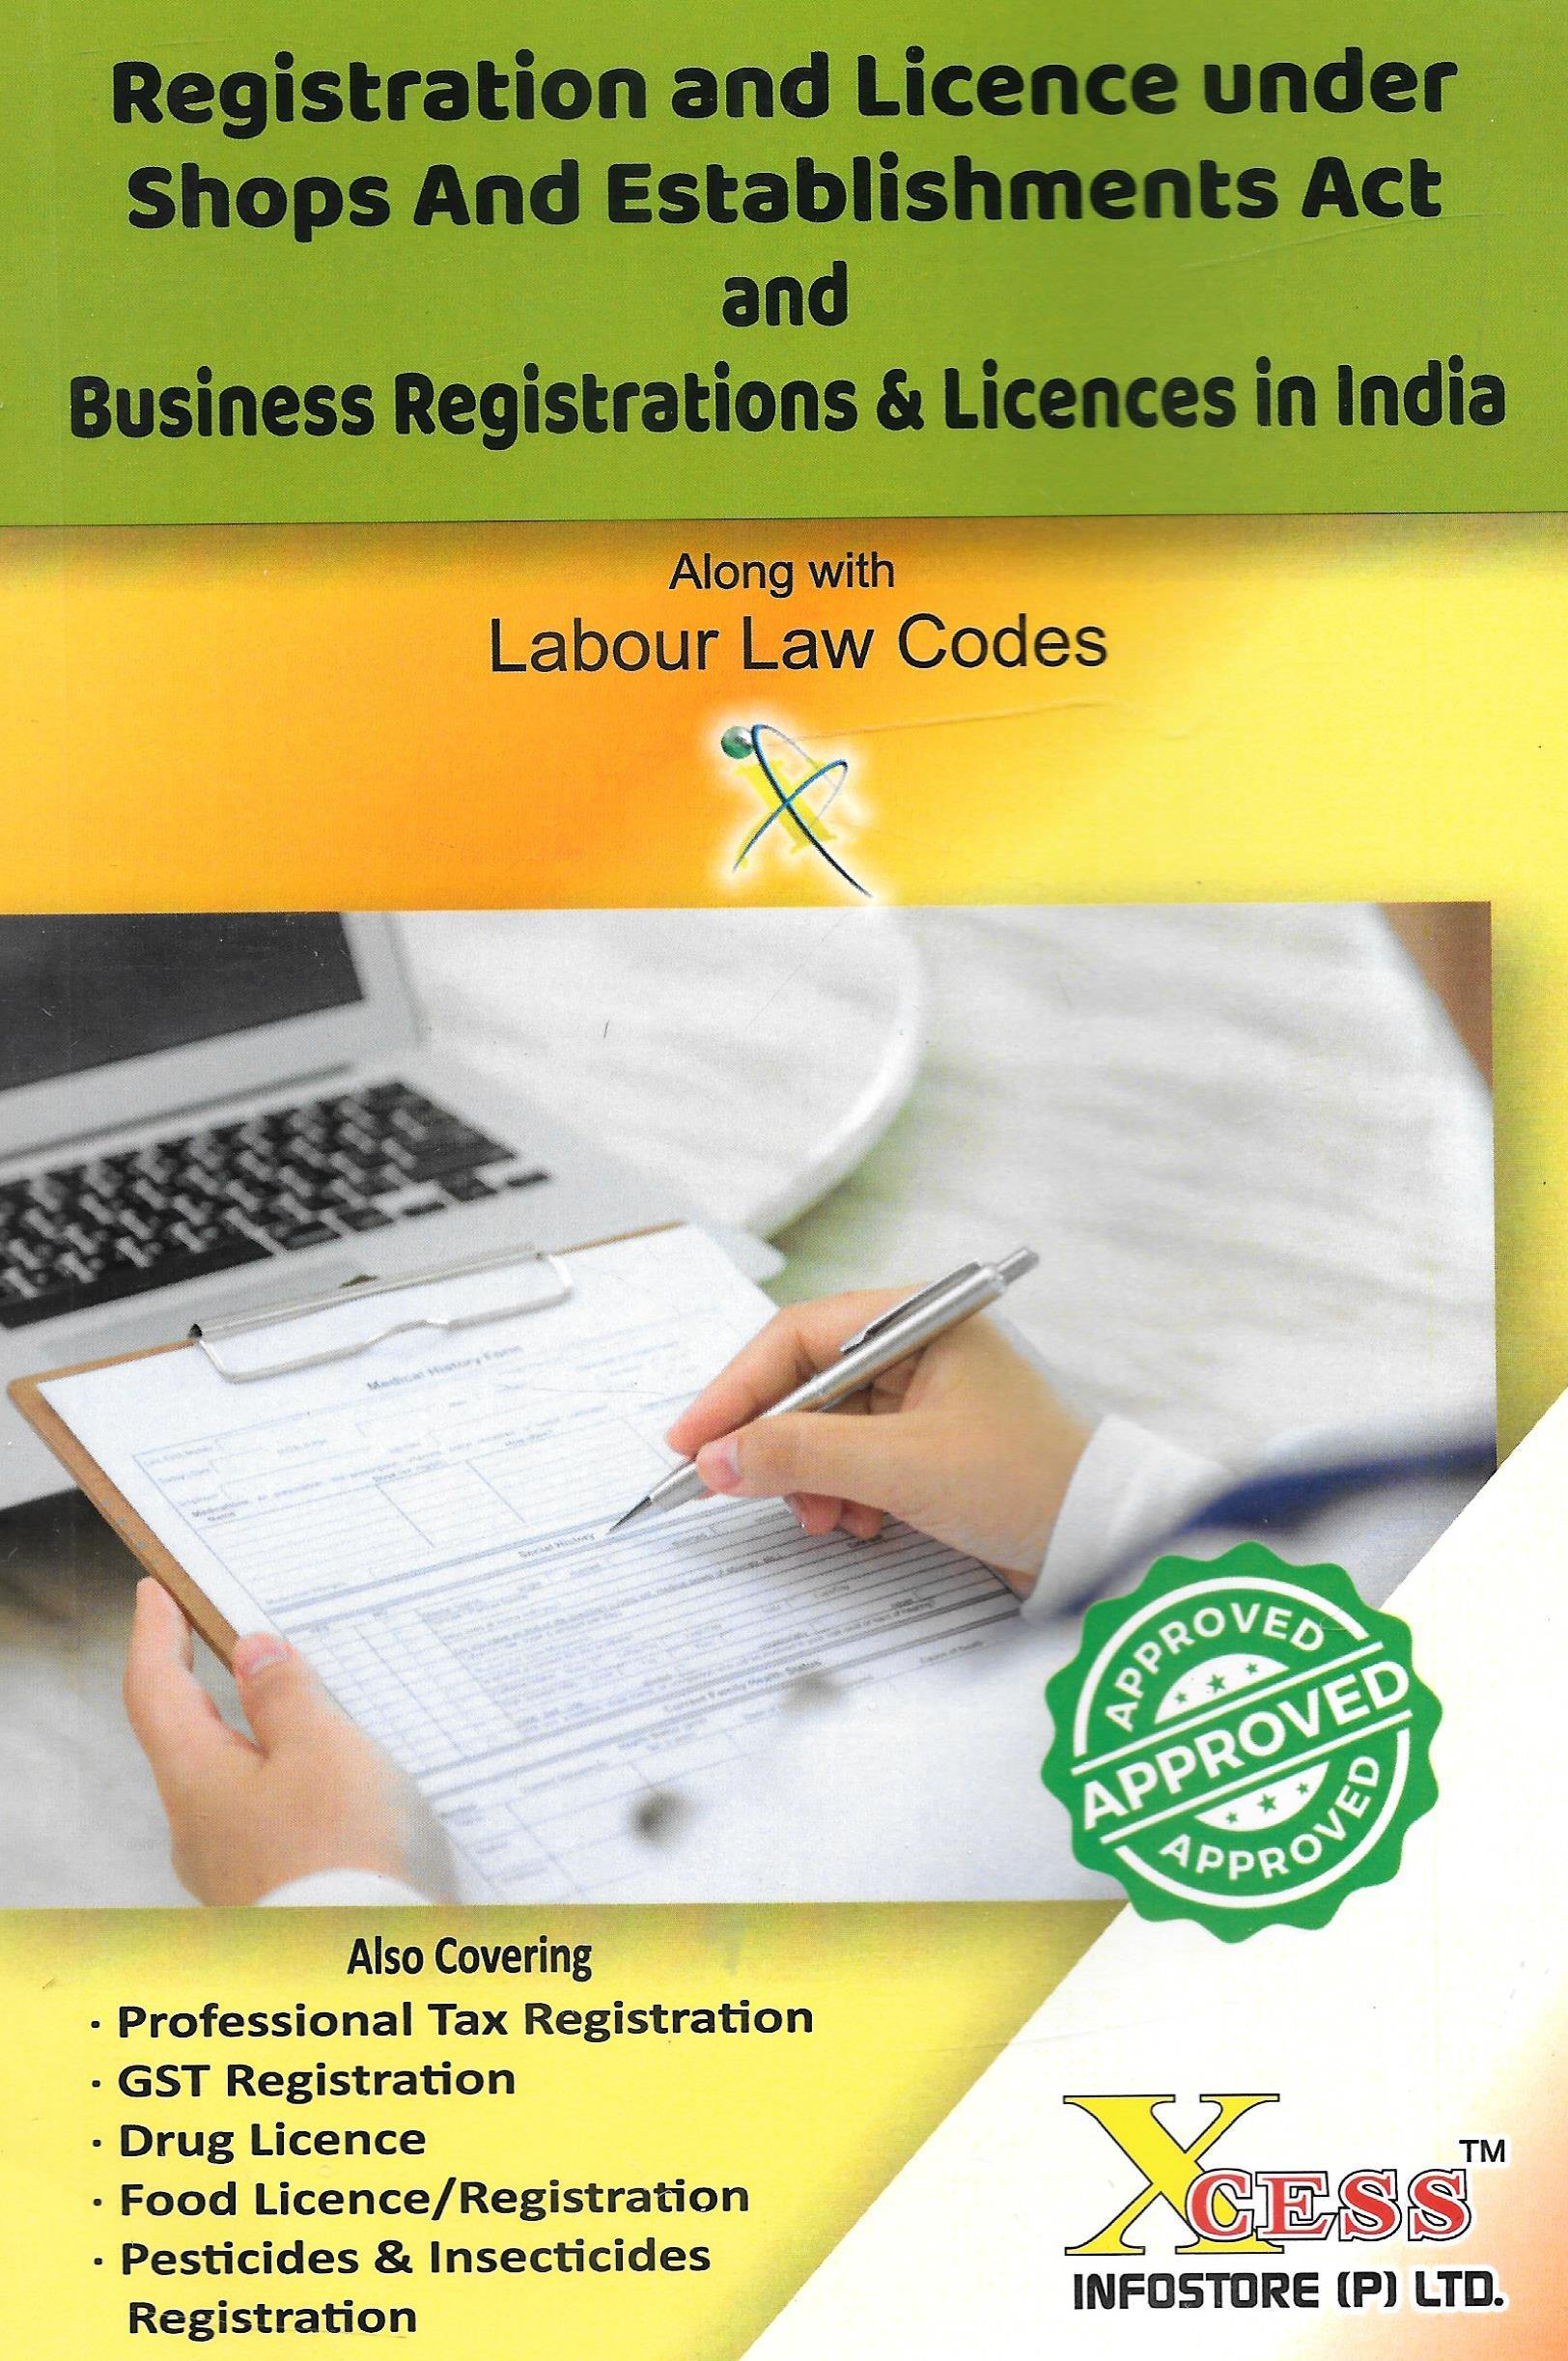 Registration and License under Shops and Establishments Act and Business Registration and Licenses in India - M&J Services